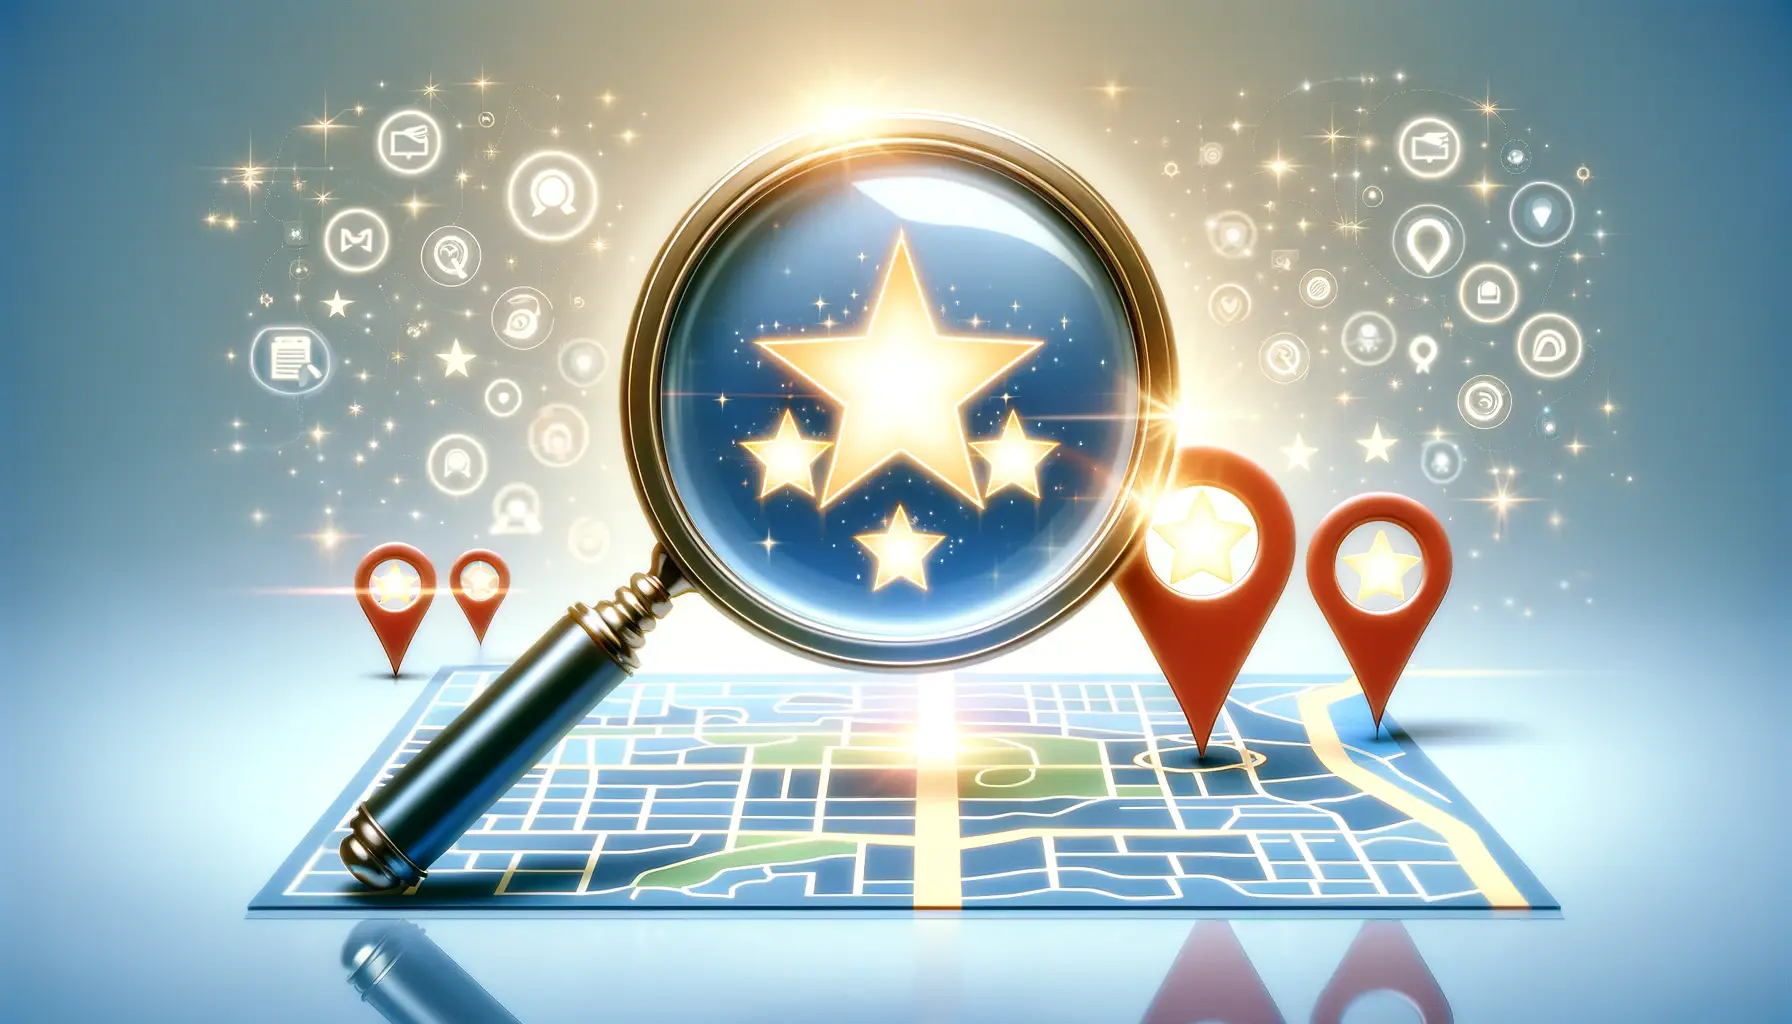 Reviews Impact on Local SEO